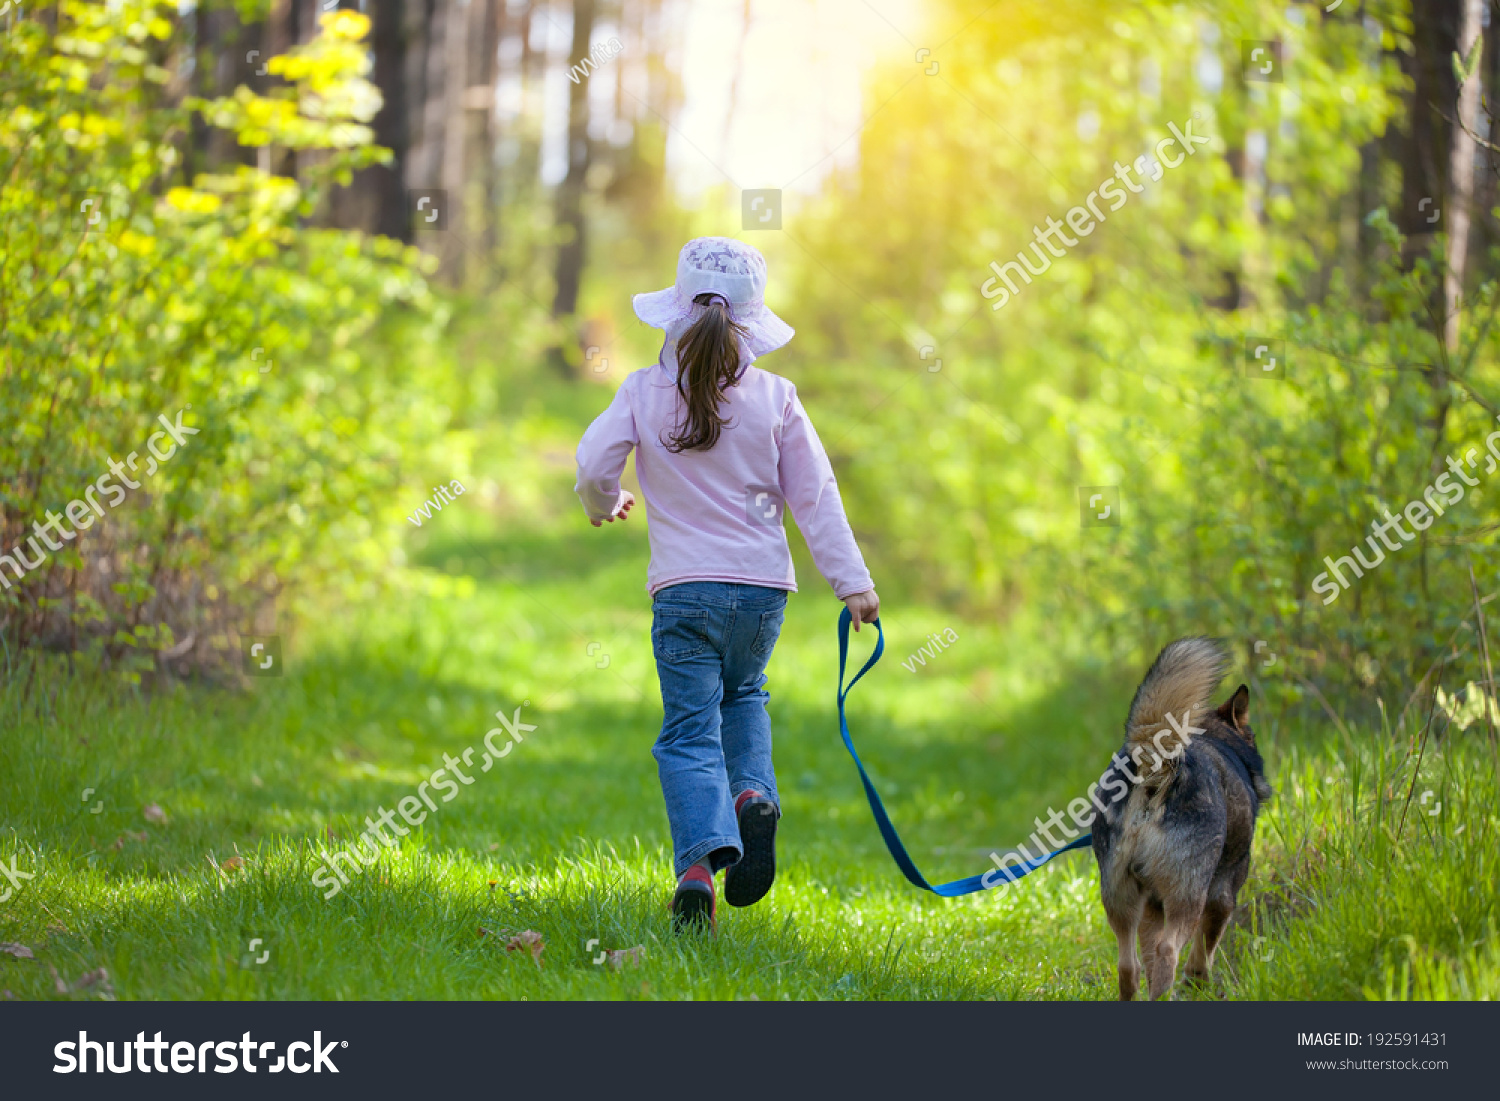 Little girl with dog running in the forest. Back to camera. #192591431